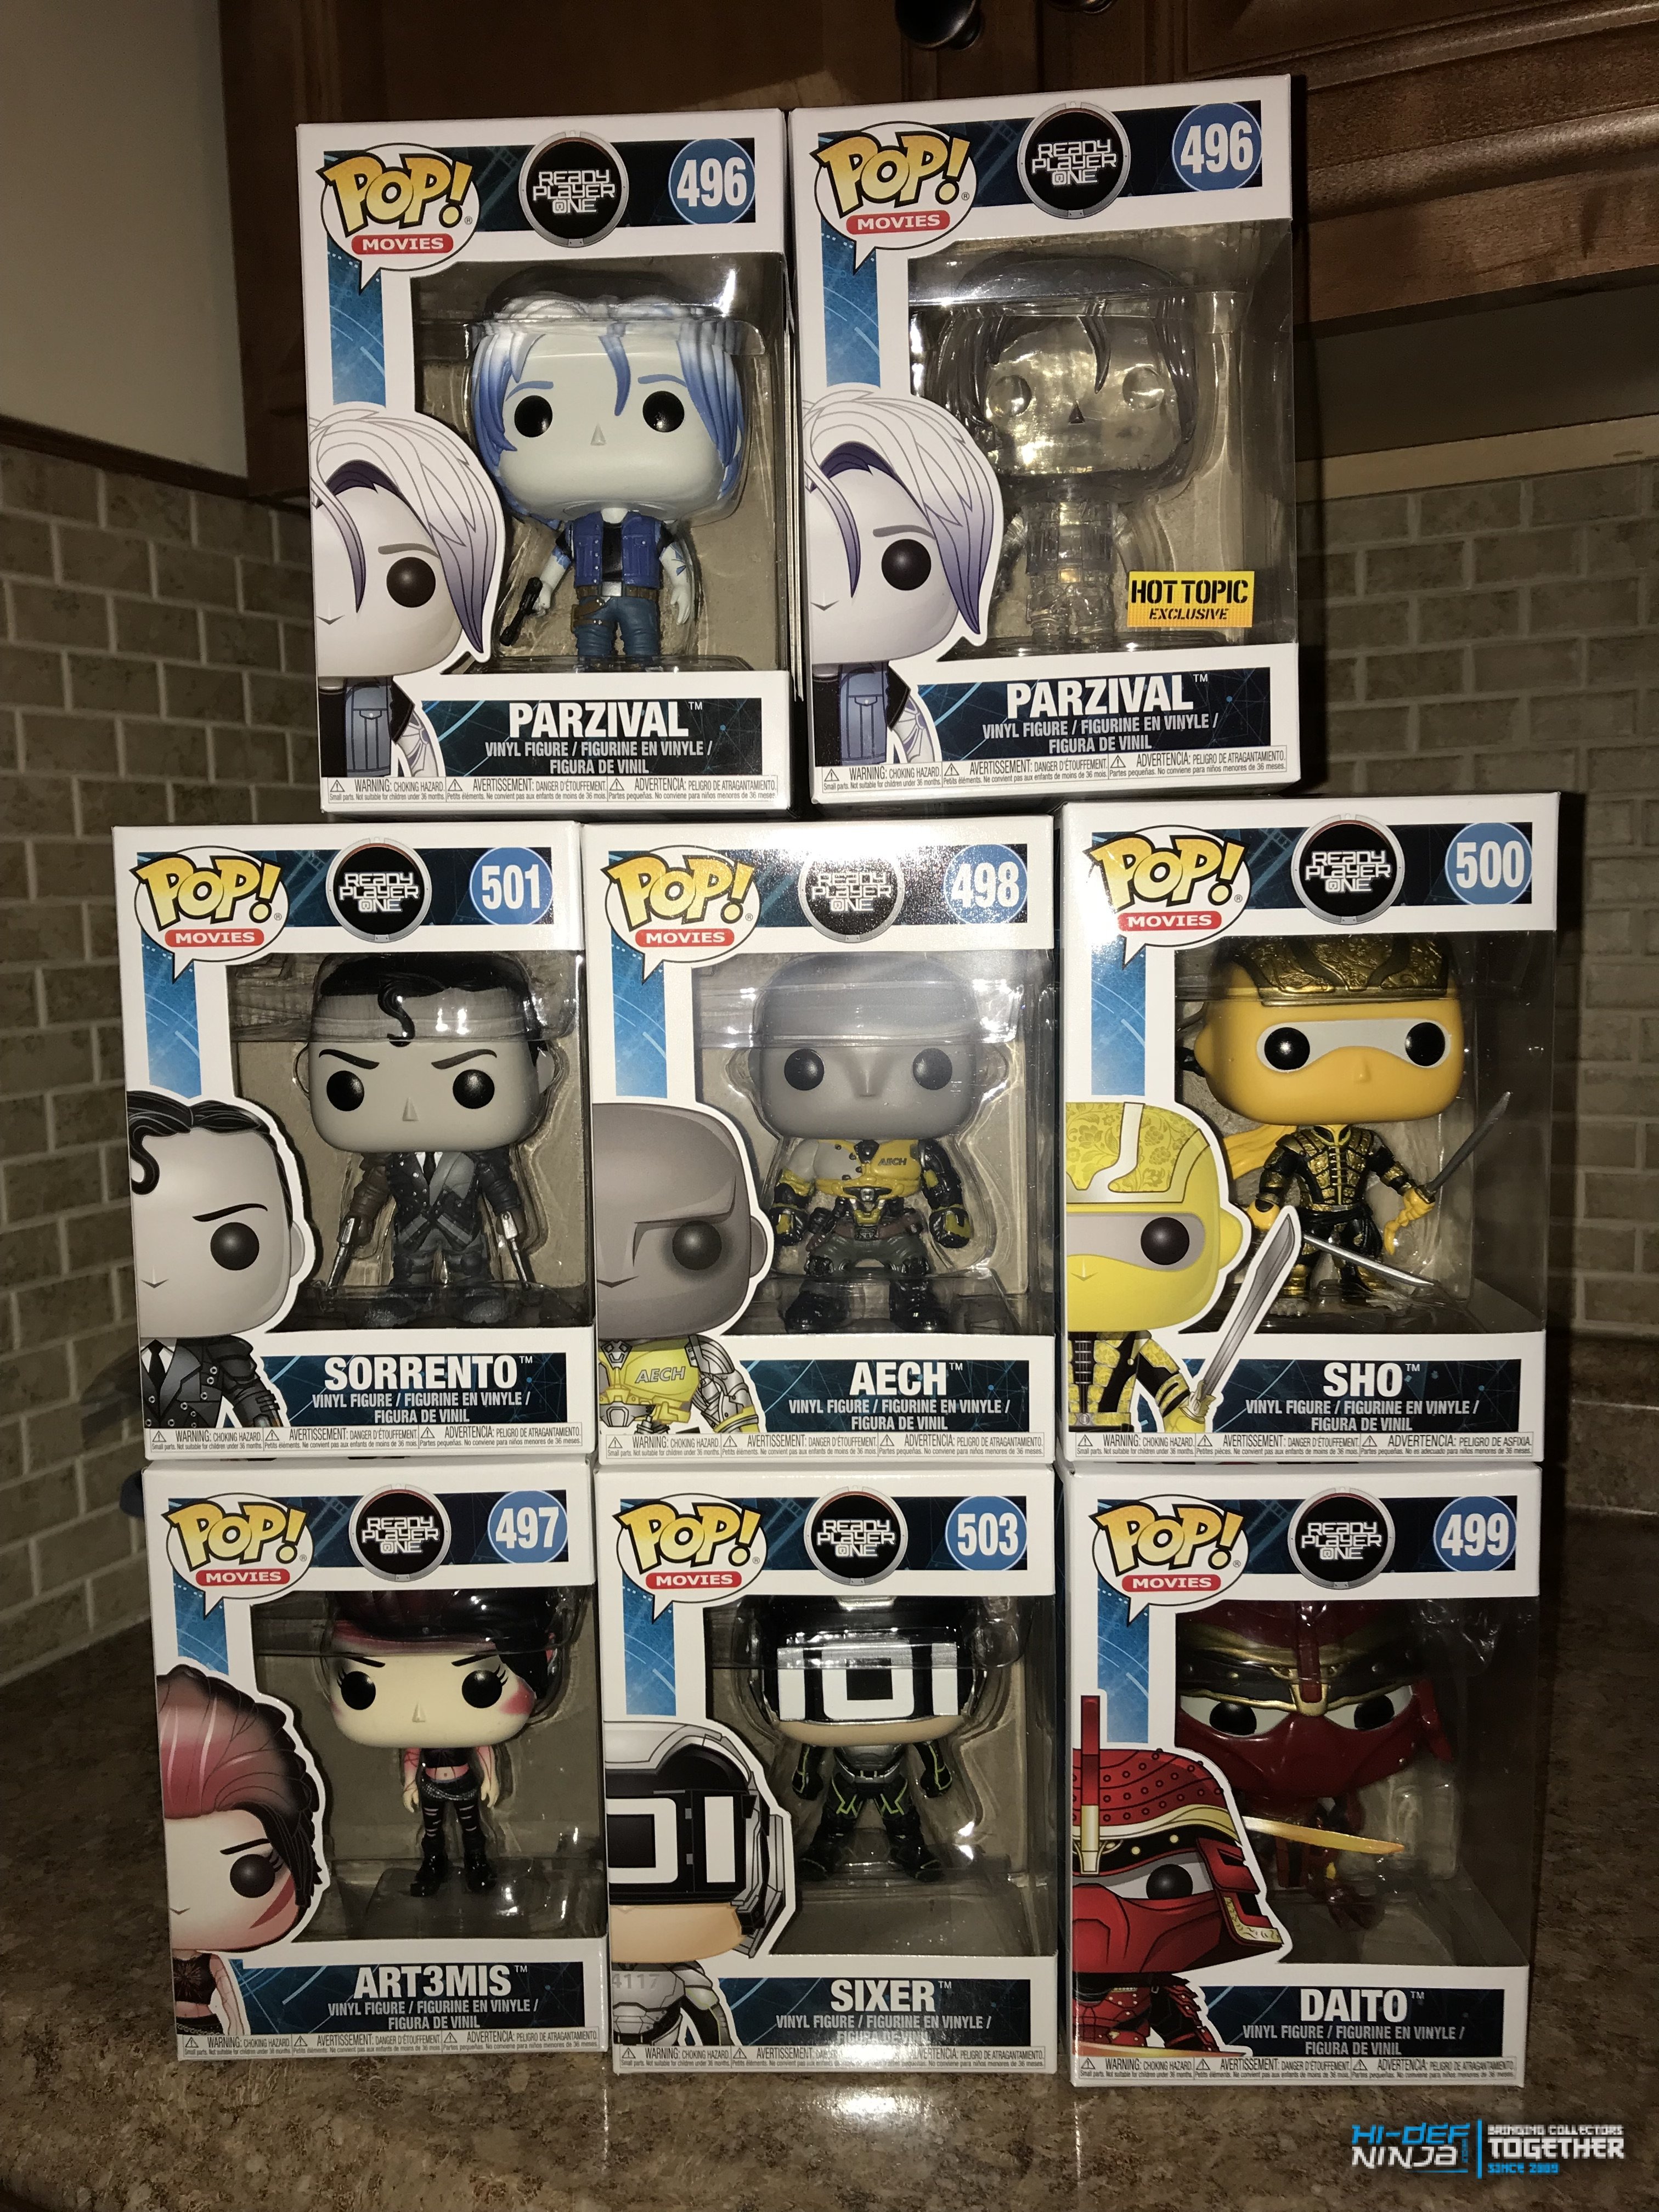 Ready Player One pops